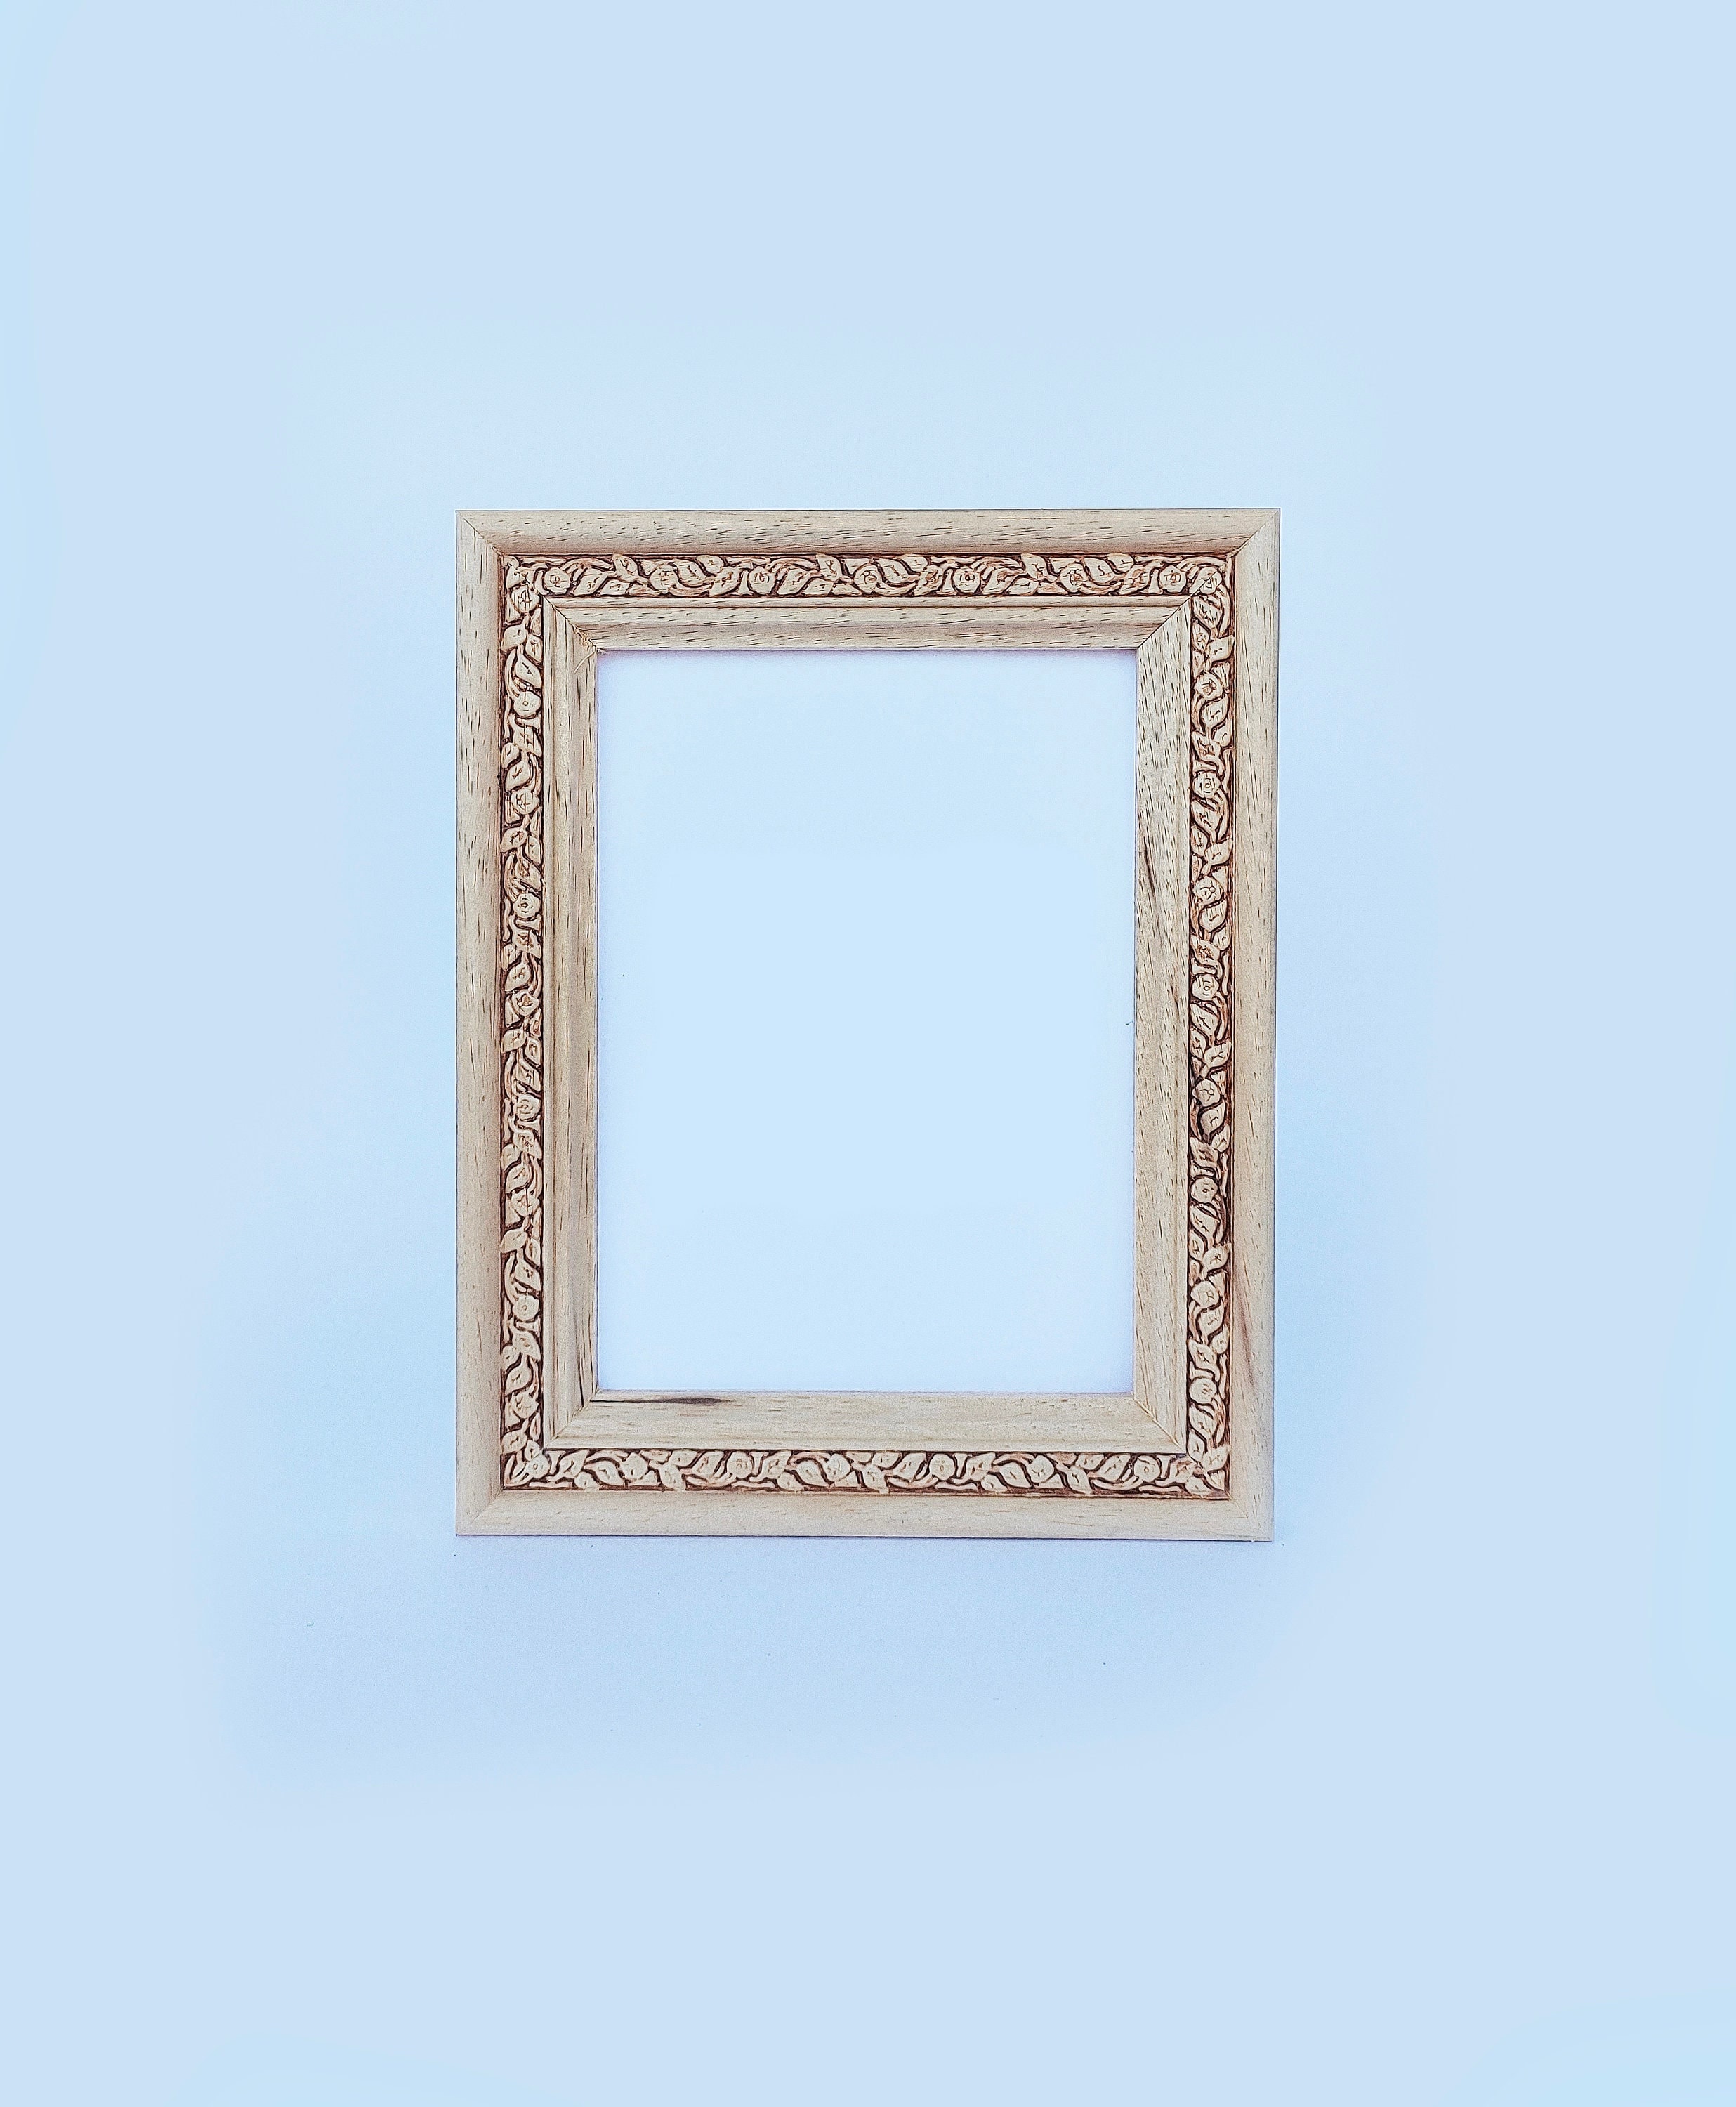 Red Picture Frame Photo Frame 4 X 6 Inches 10.16 X 15.24 